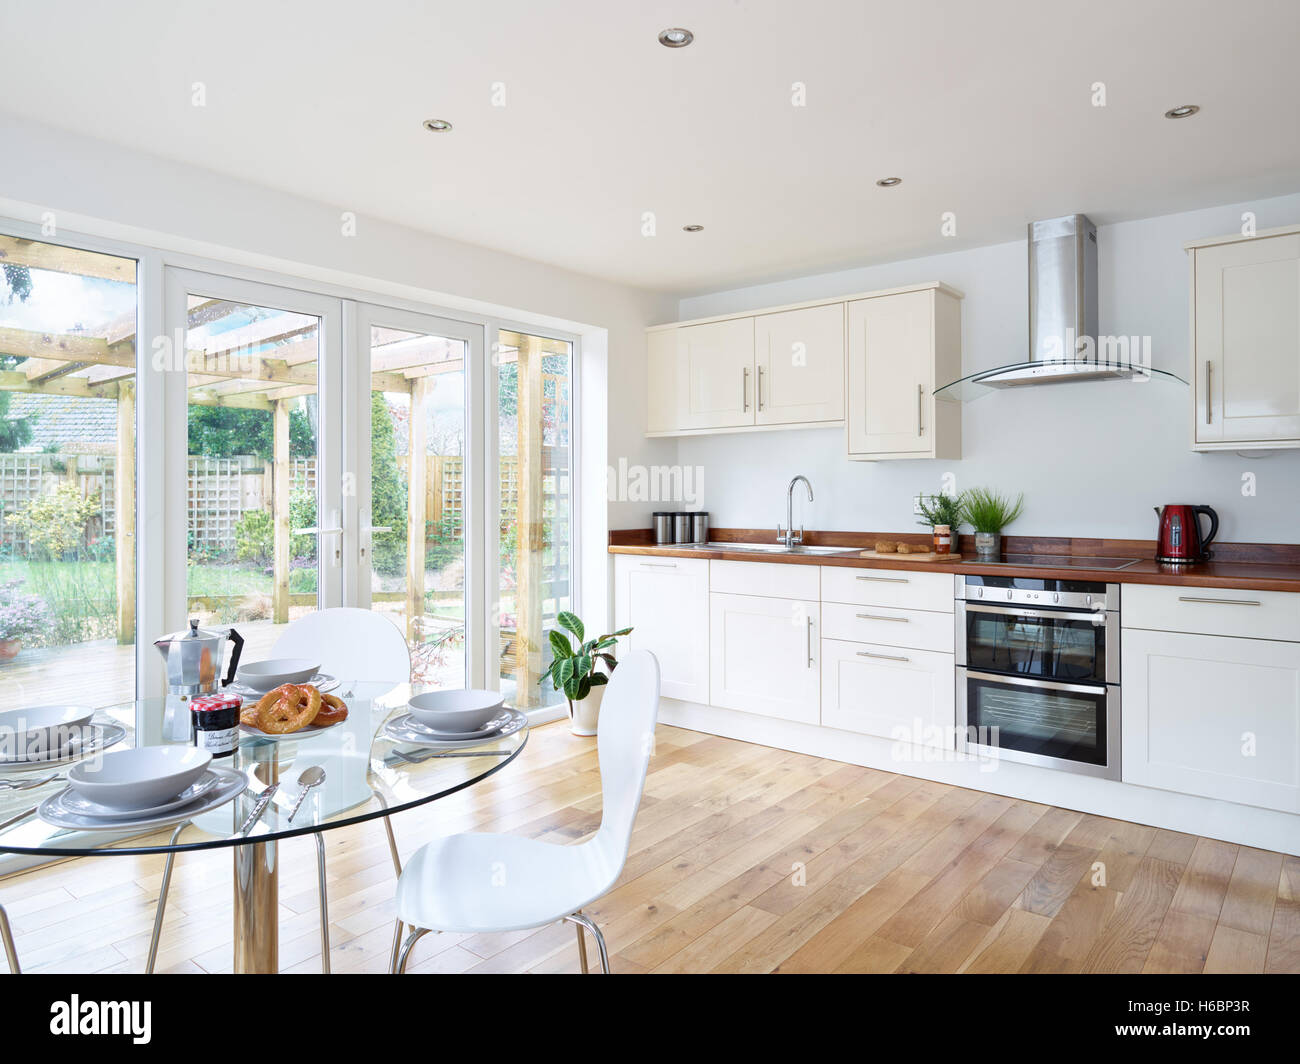 A contemporary, fresh open plan kitchen incorporating an integrated oven, cooker, hood & wood work surfaces. Oxfordshire, UK Stock Photo